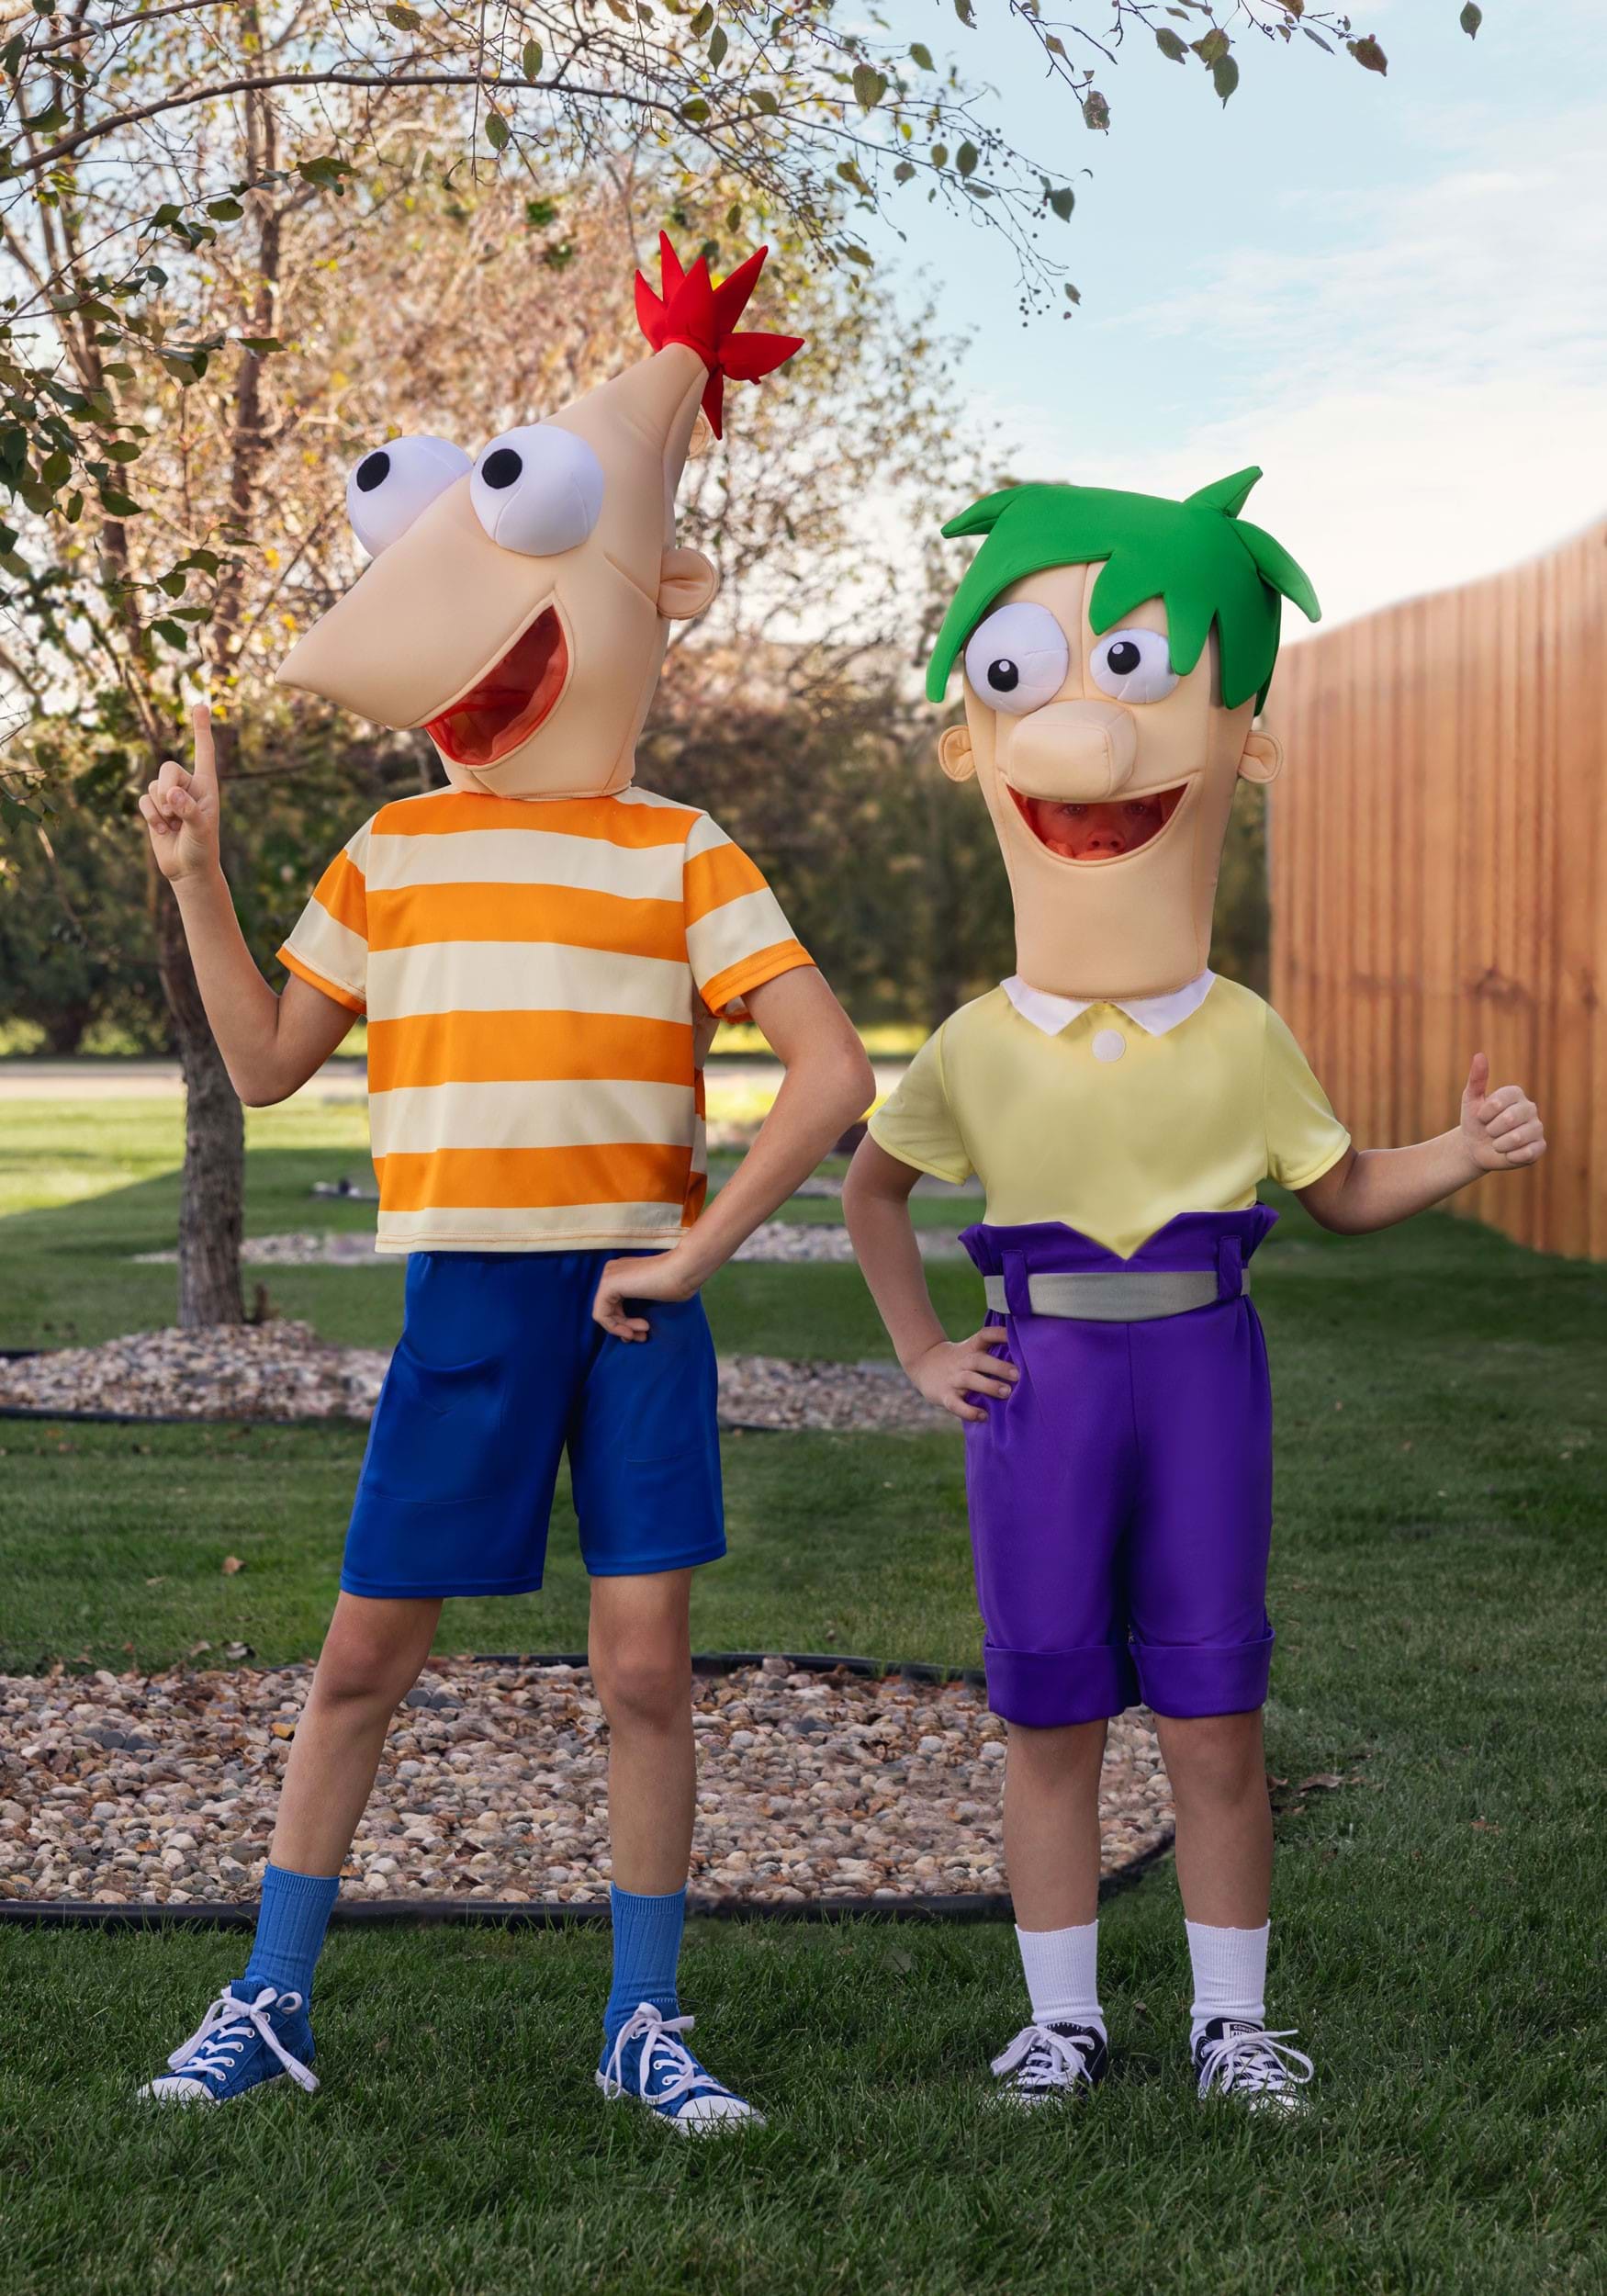 Disney Phineas and Ferb Ferb Costume for Kids | Boy's Disney Costumes